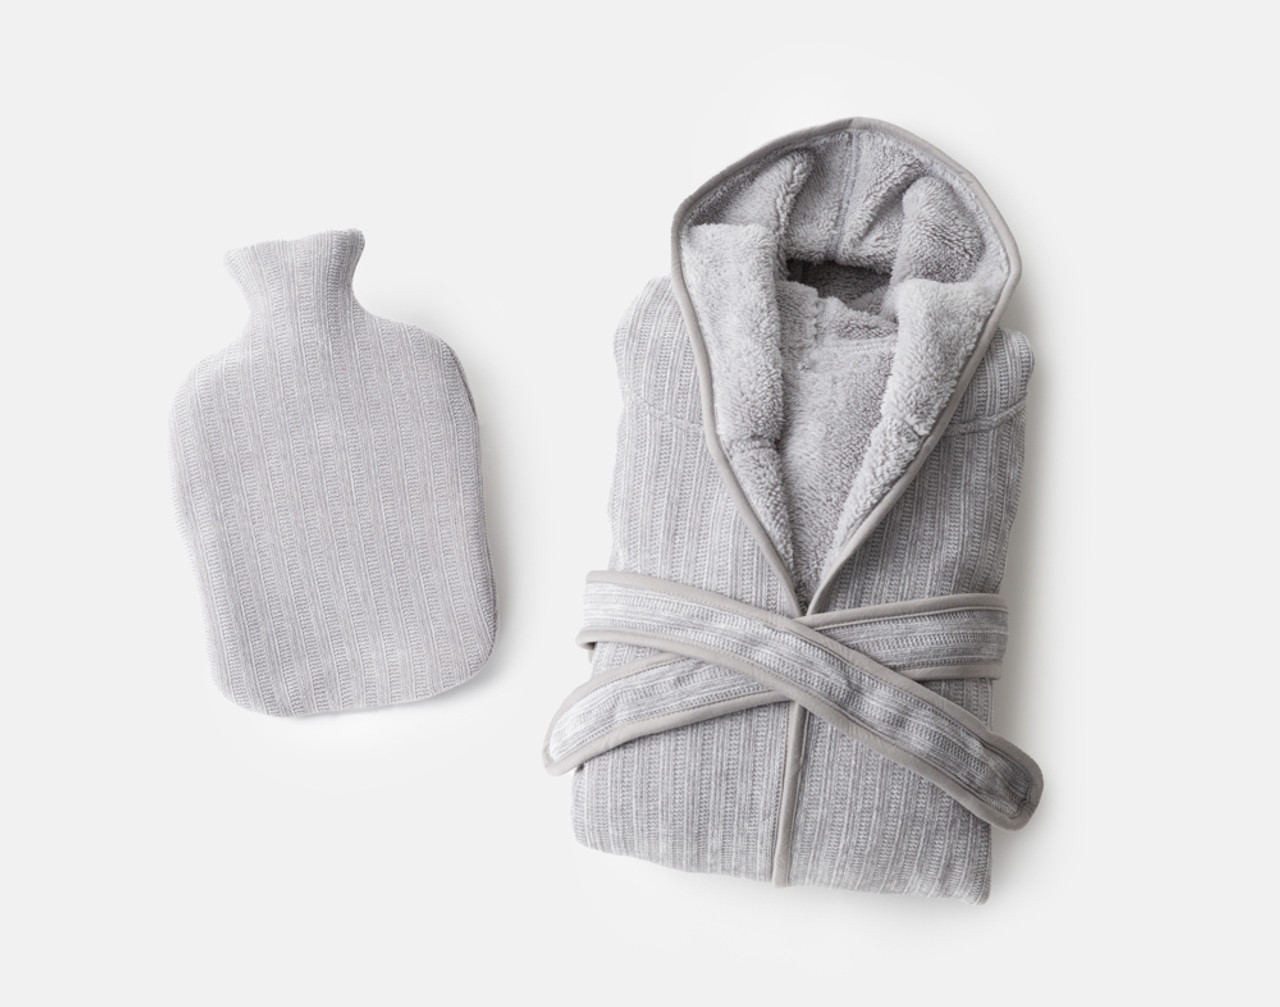 Top view of our Warm Me Up Gift Set in Grey with its folded White Chenille Sherpa Bathrobe and matching White Chenille Sherpa Hot Water Bottle.